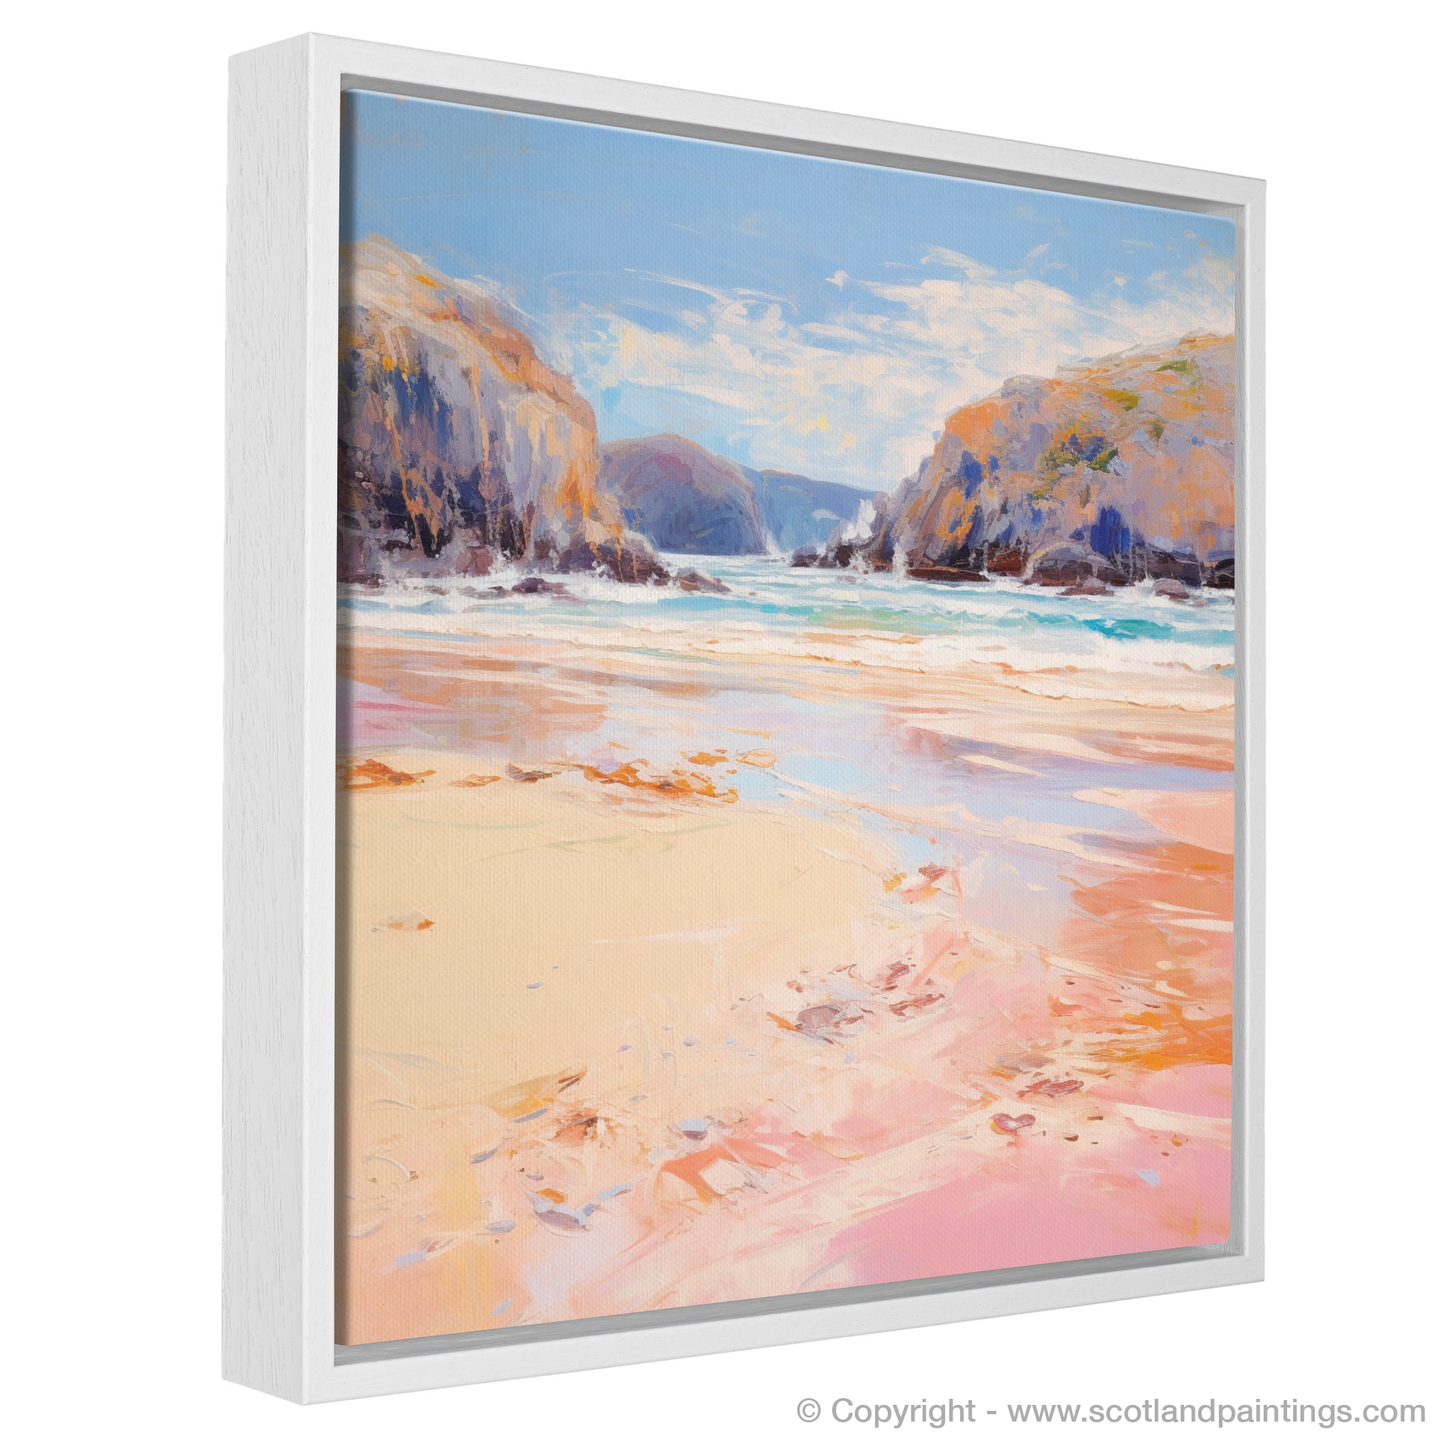 Painting and Art Print of Sandwood Bay, Sutherland in summer entitled "Summer Solitude at Sandwood Bay".